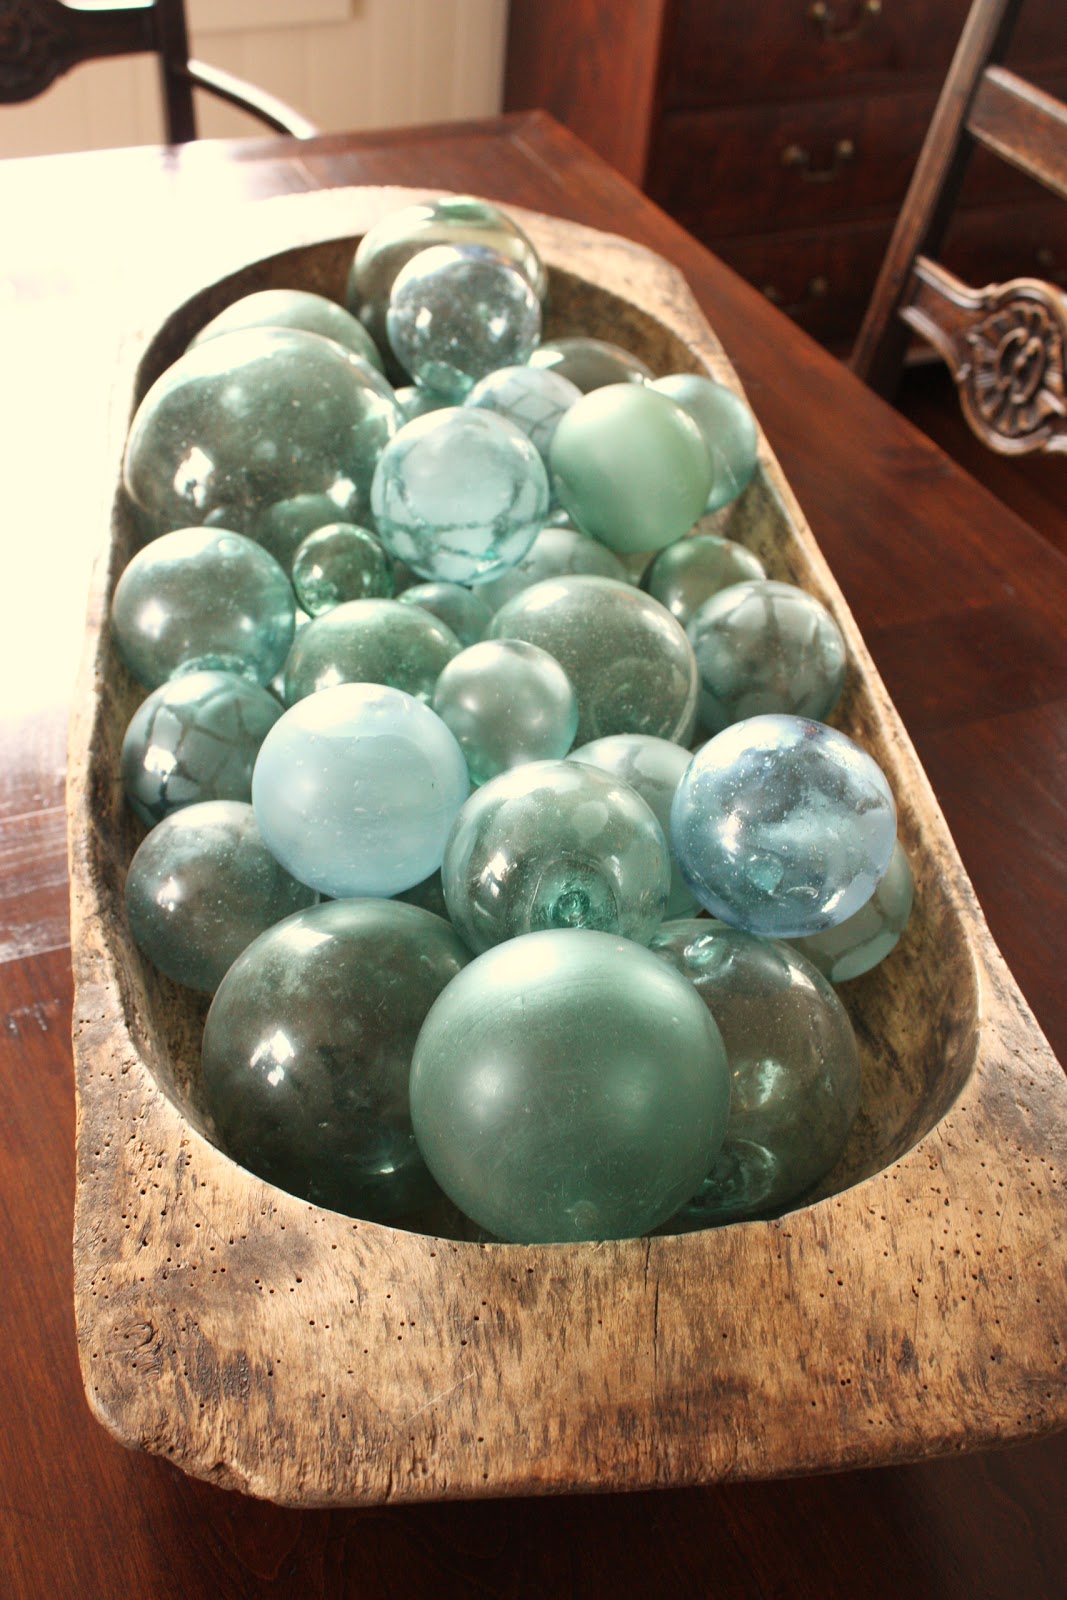 2.5 Japanese Glass Floats w/ Netting, Vintage Fishing Buoys From